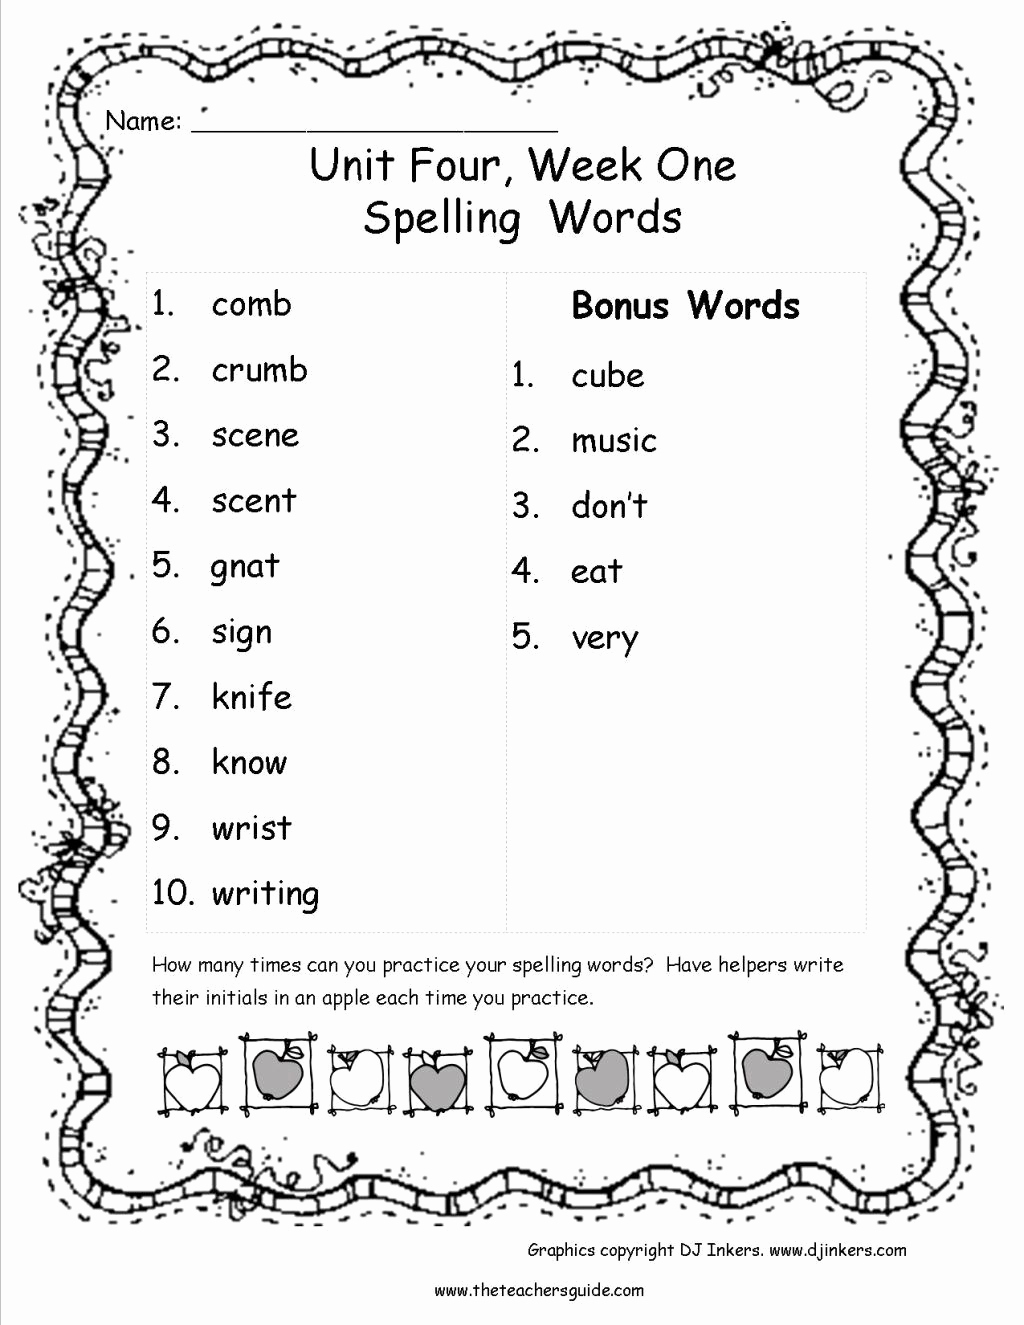 Second Grade Spelling Worksheets Awesome 2nd Grade Spelling Worksheets for Printable 2nd Grade